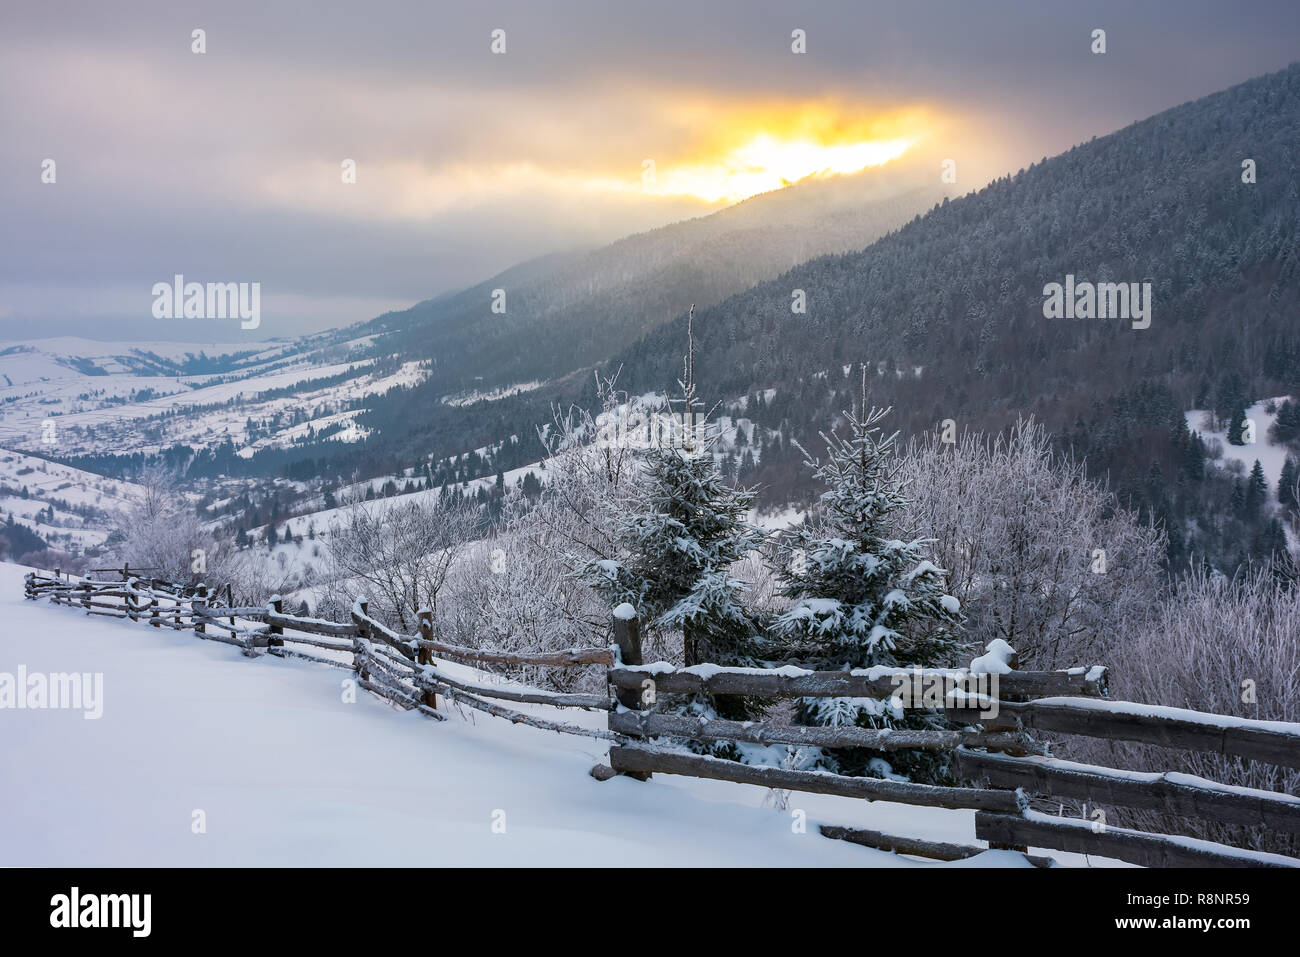 wonderful snowy countryside in mountains. spruce trees and wooden fence on the edge of a slope. winter sun rise behind the ridge and cloudy sky Stock Photo